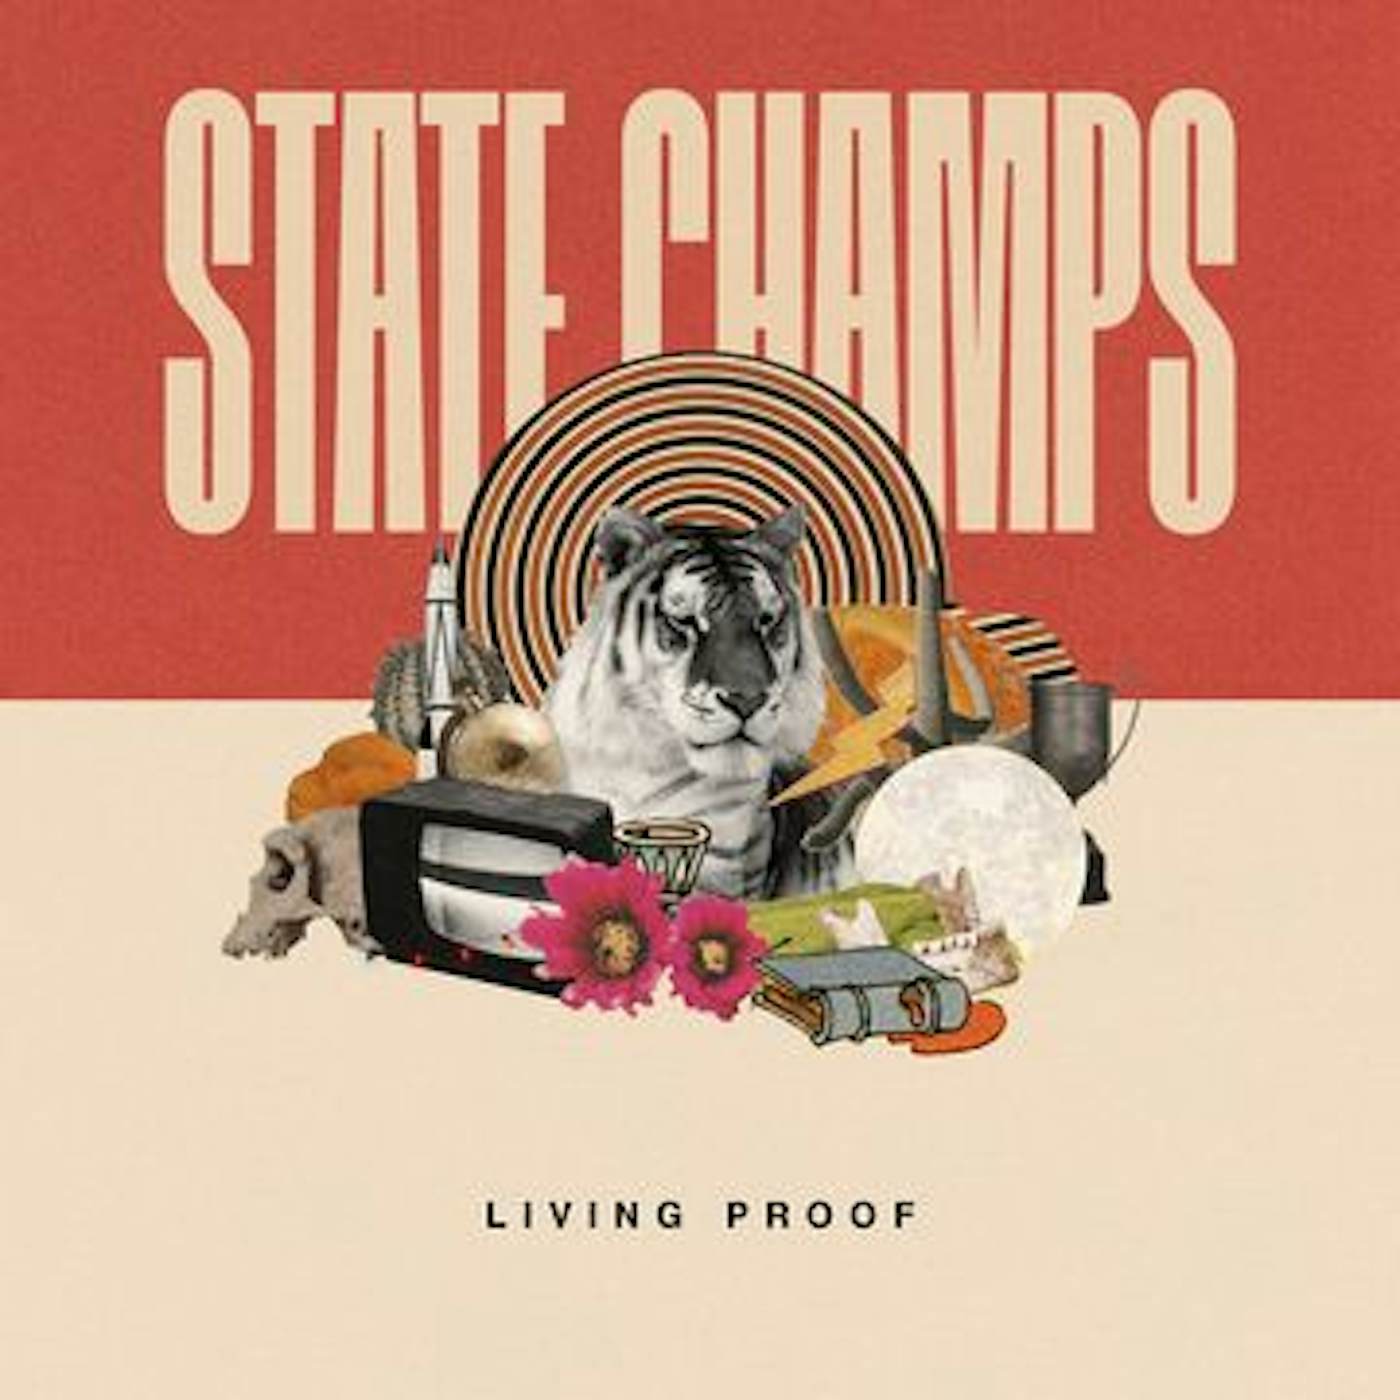 State Champs Living Proof Vinyl Record